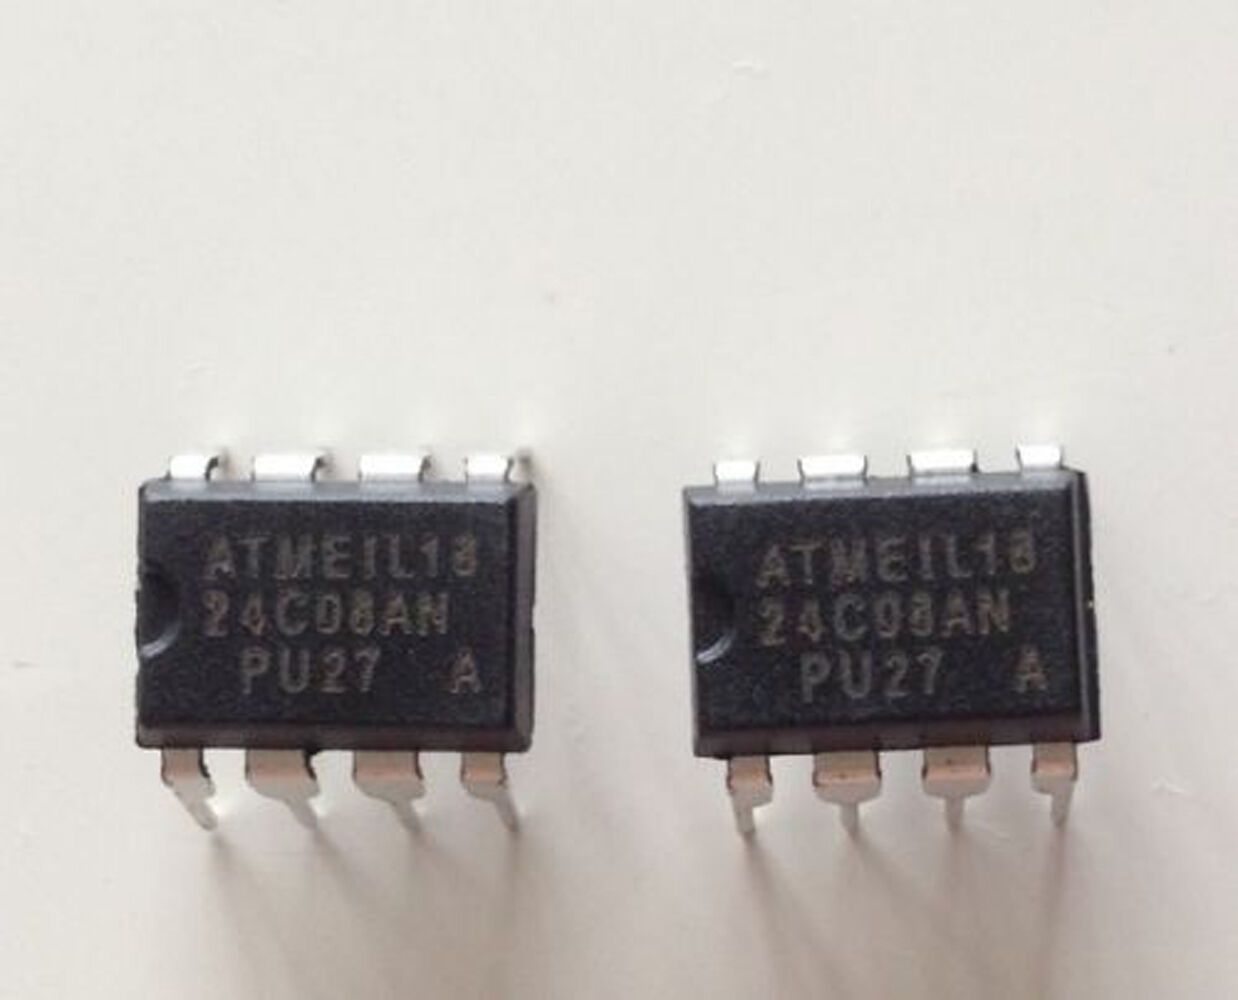 US Stock 50pcs AT24C08A-10PU-2.7 DIP-8 PU27 24C08 2-Wire Serial EEPROM